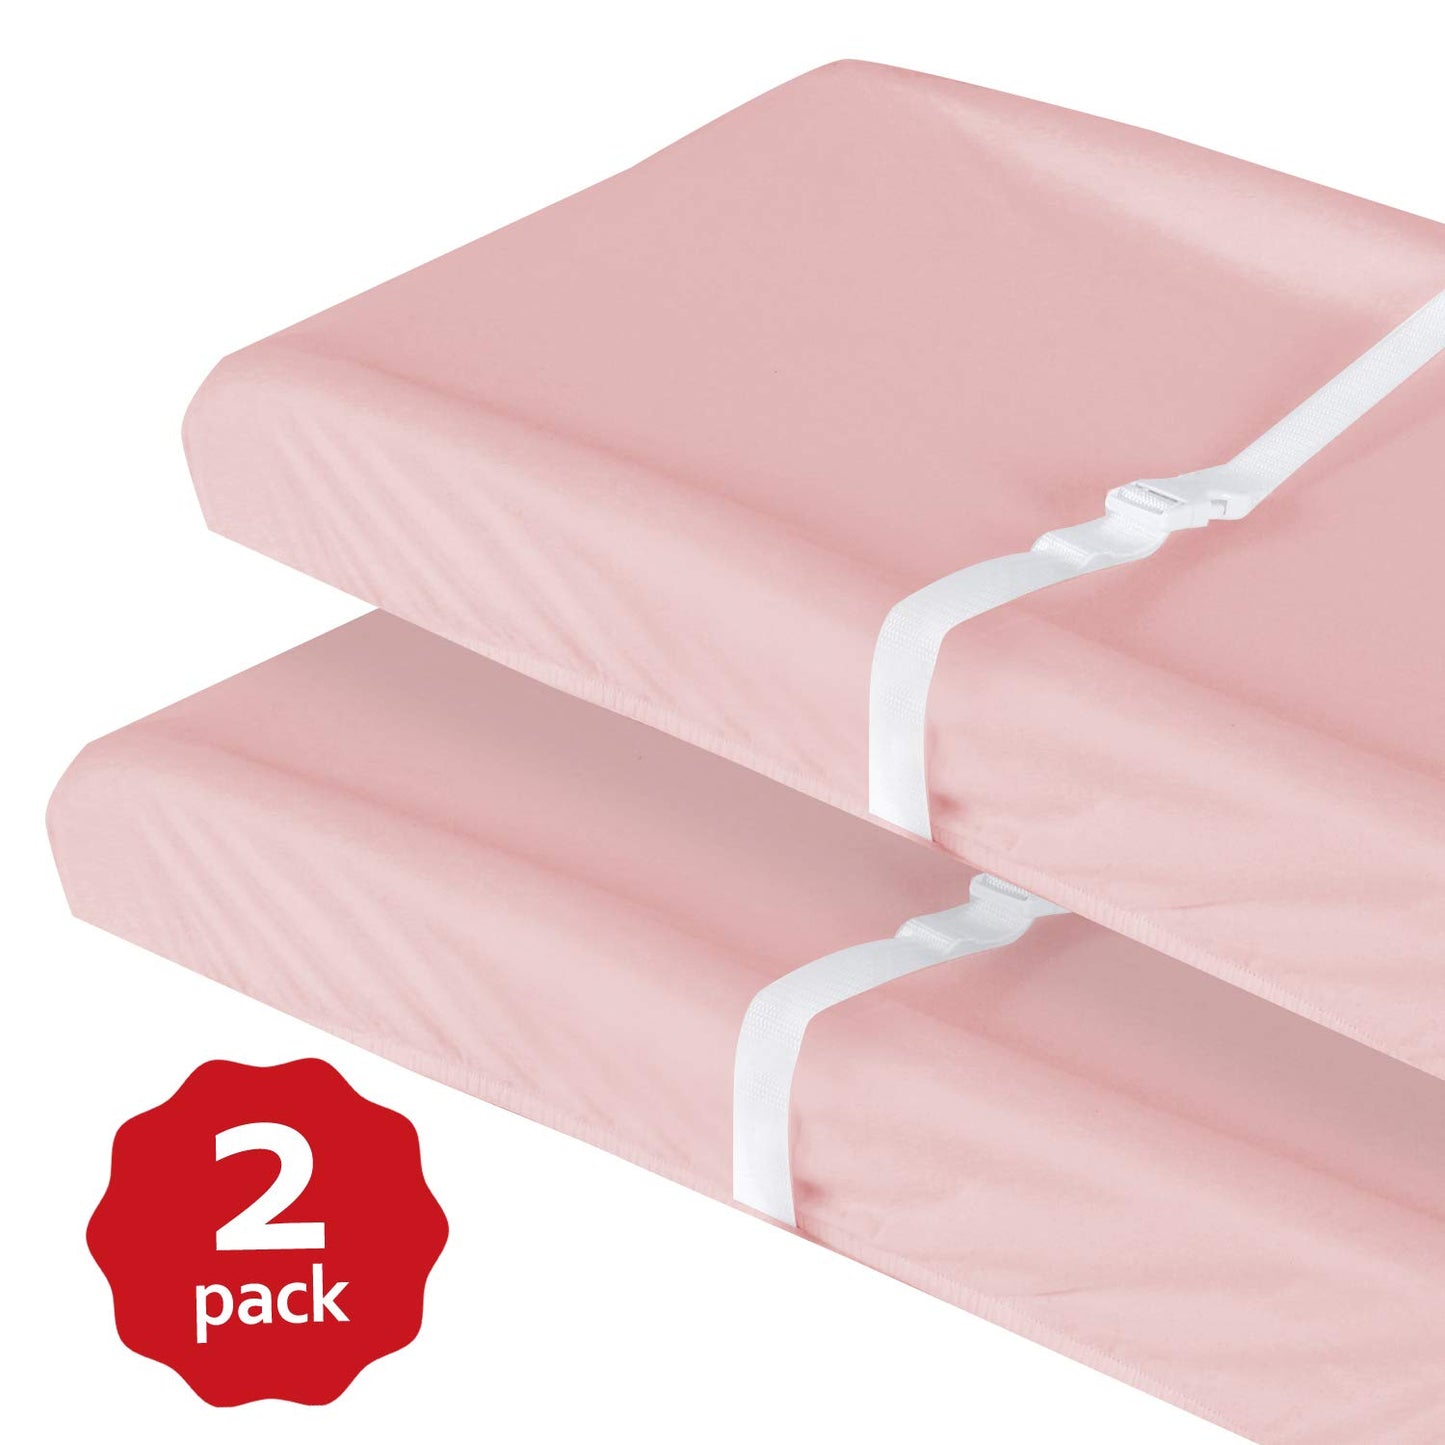 Changing Pad Cover- 2 Pack Pink, Ultra Soft Jersey Knit Cotton